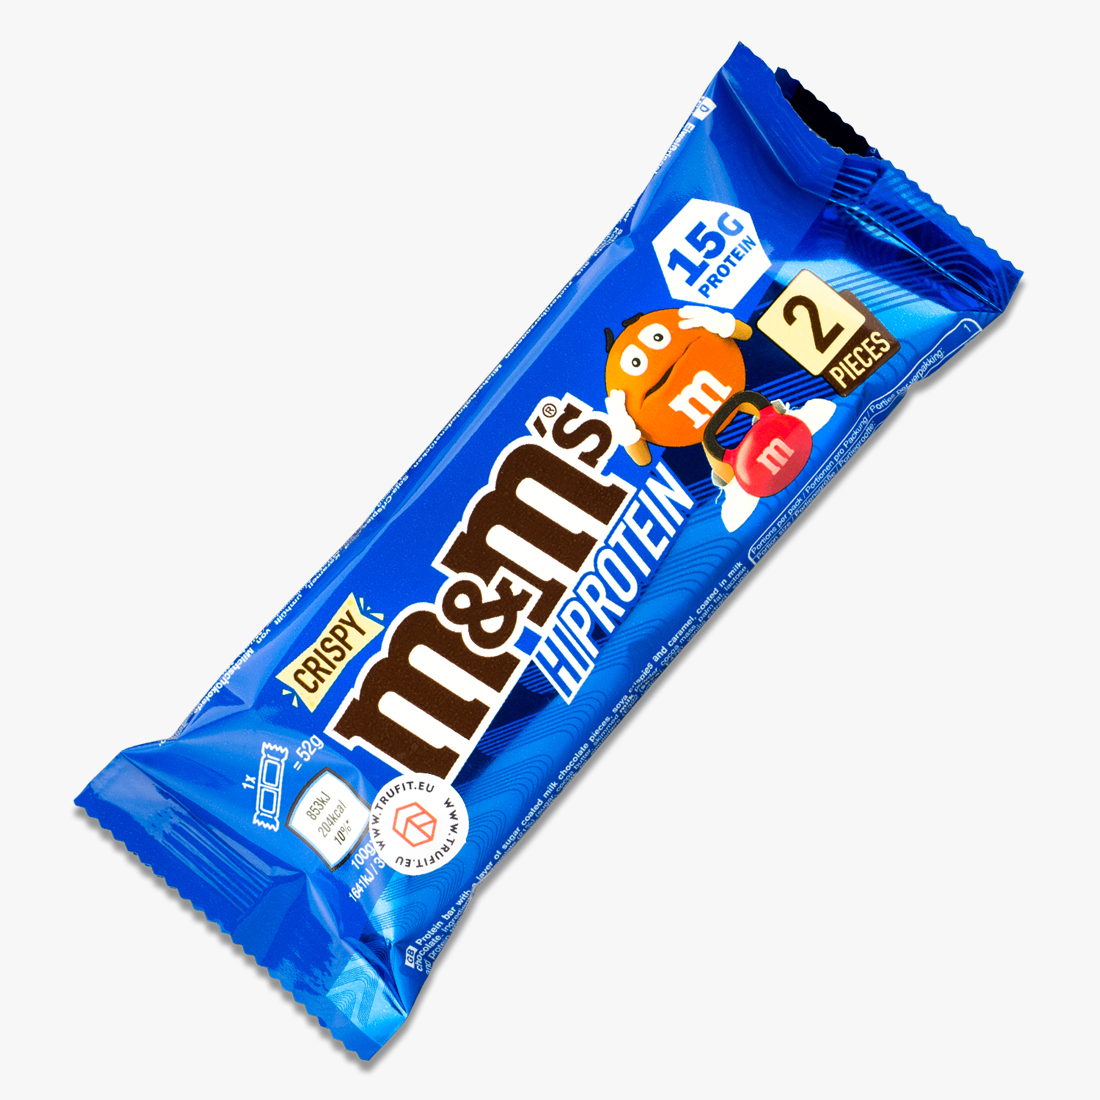 M&M HI protein bar  available at Real Nutrition Shop - Real